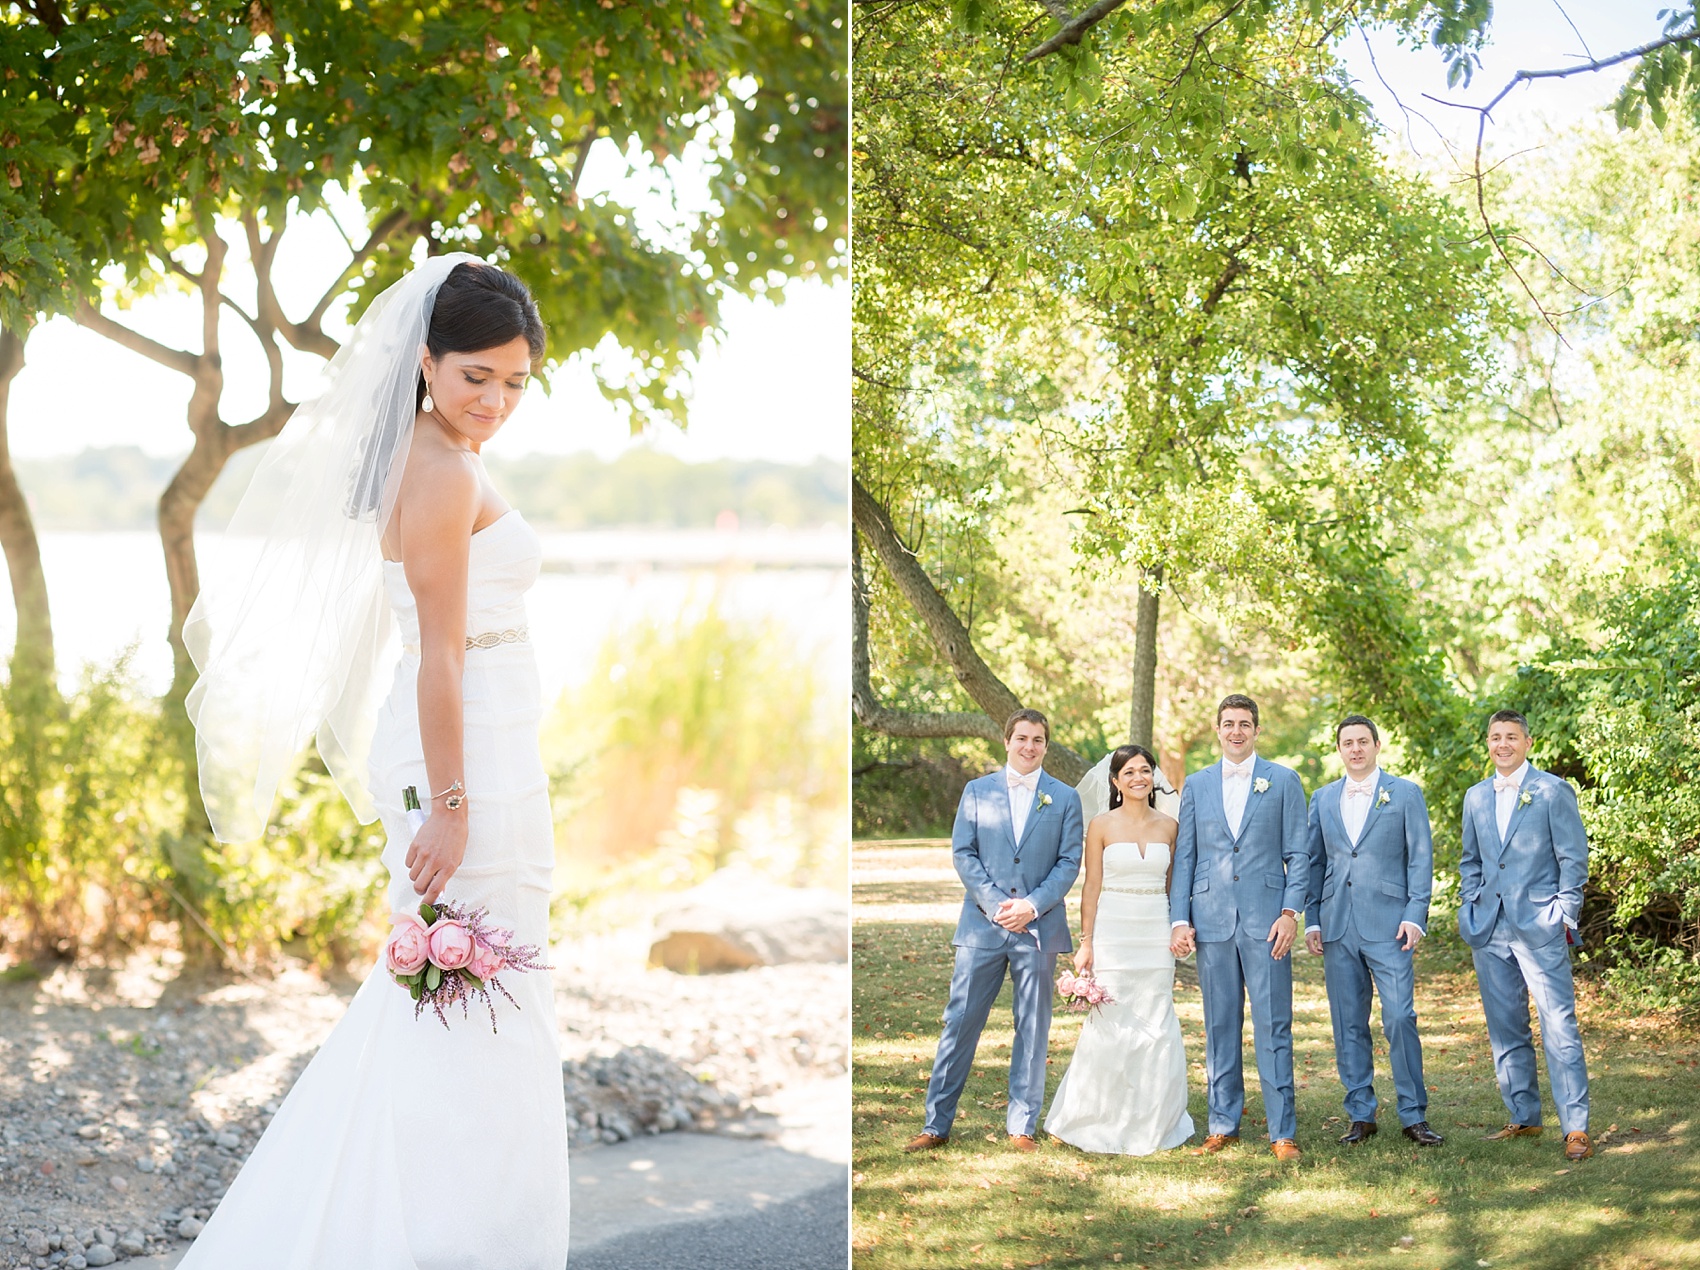 Connecticut Weed Beach wedding photos by Mikkel Paige Photography. Groom in blue suit and pink bow tie.